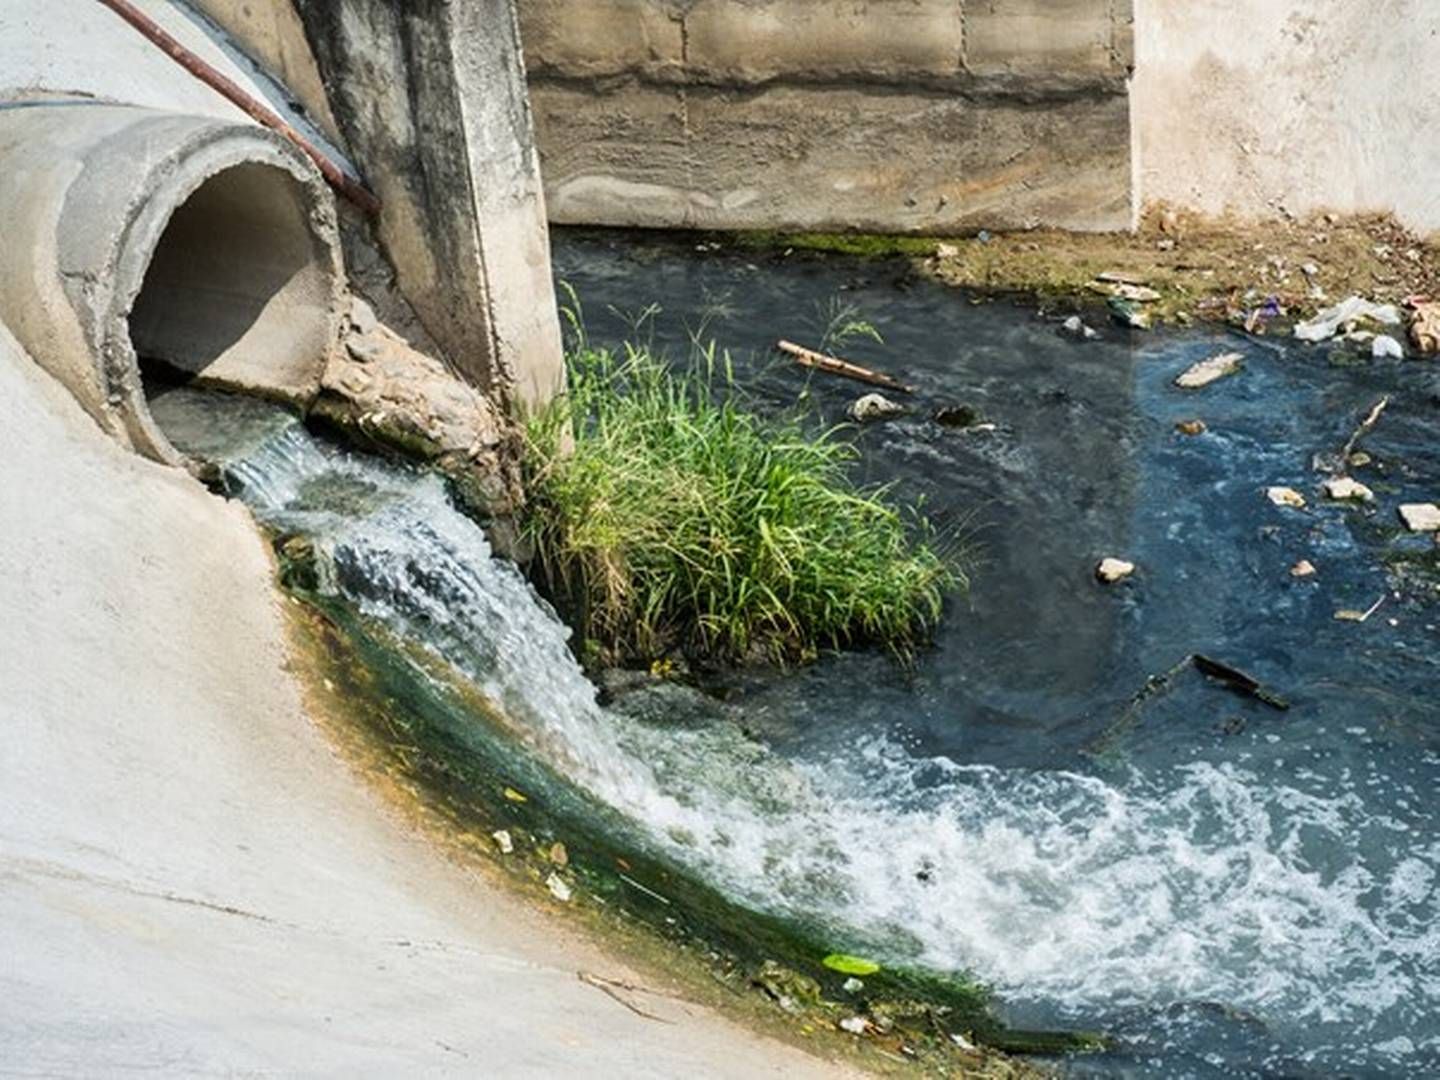 92% of environmentally hazardous drugs in Europe’s wastewater comes from pharmaceuticals and cosmetics, according to the EU Commission | Foto: Miljøstyrelsen